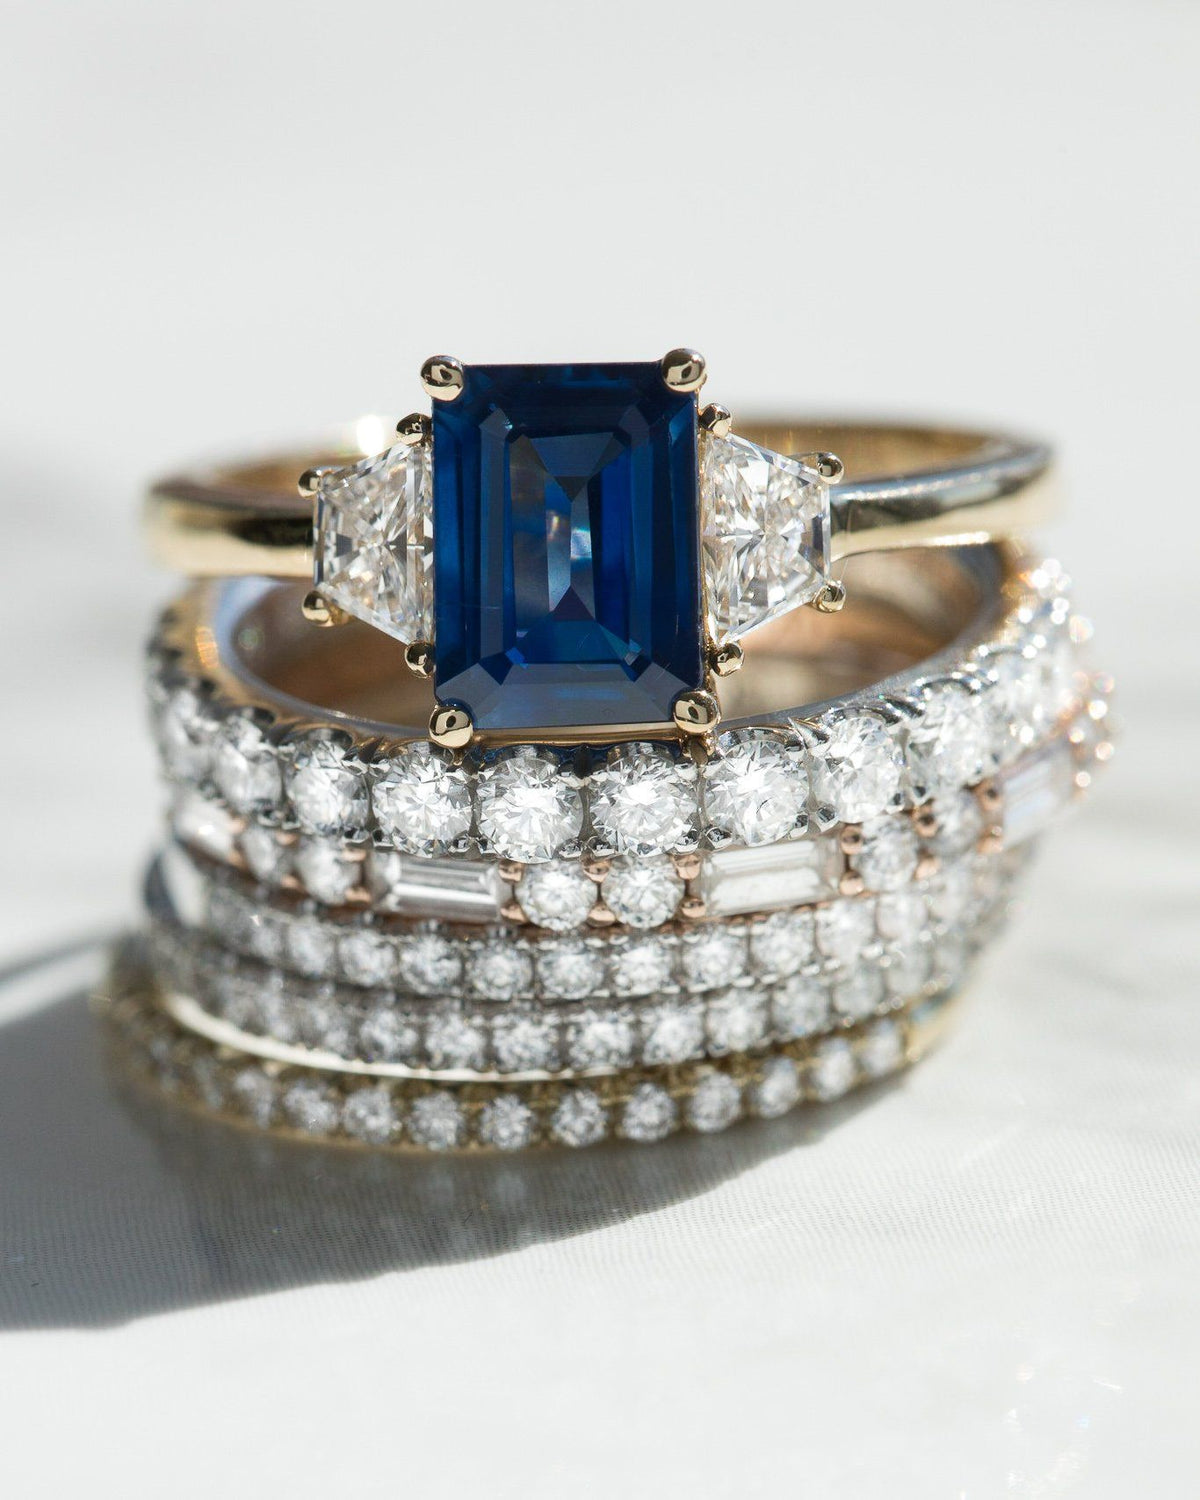 Sapphire Emerald Cut With Trapezoid Side Stone Engagement Ring by Good Stone available in Gold and Platinum